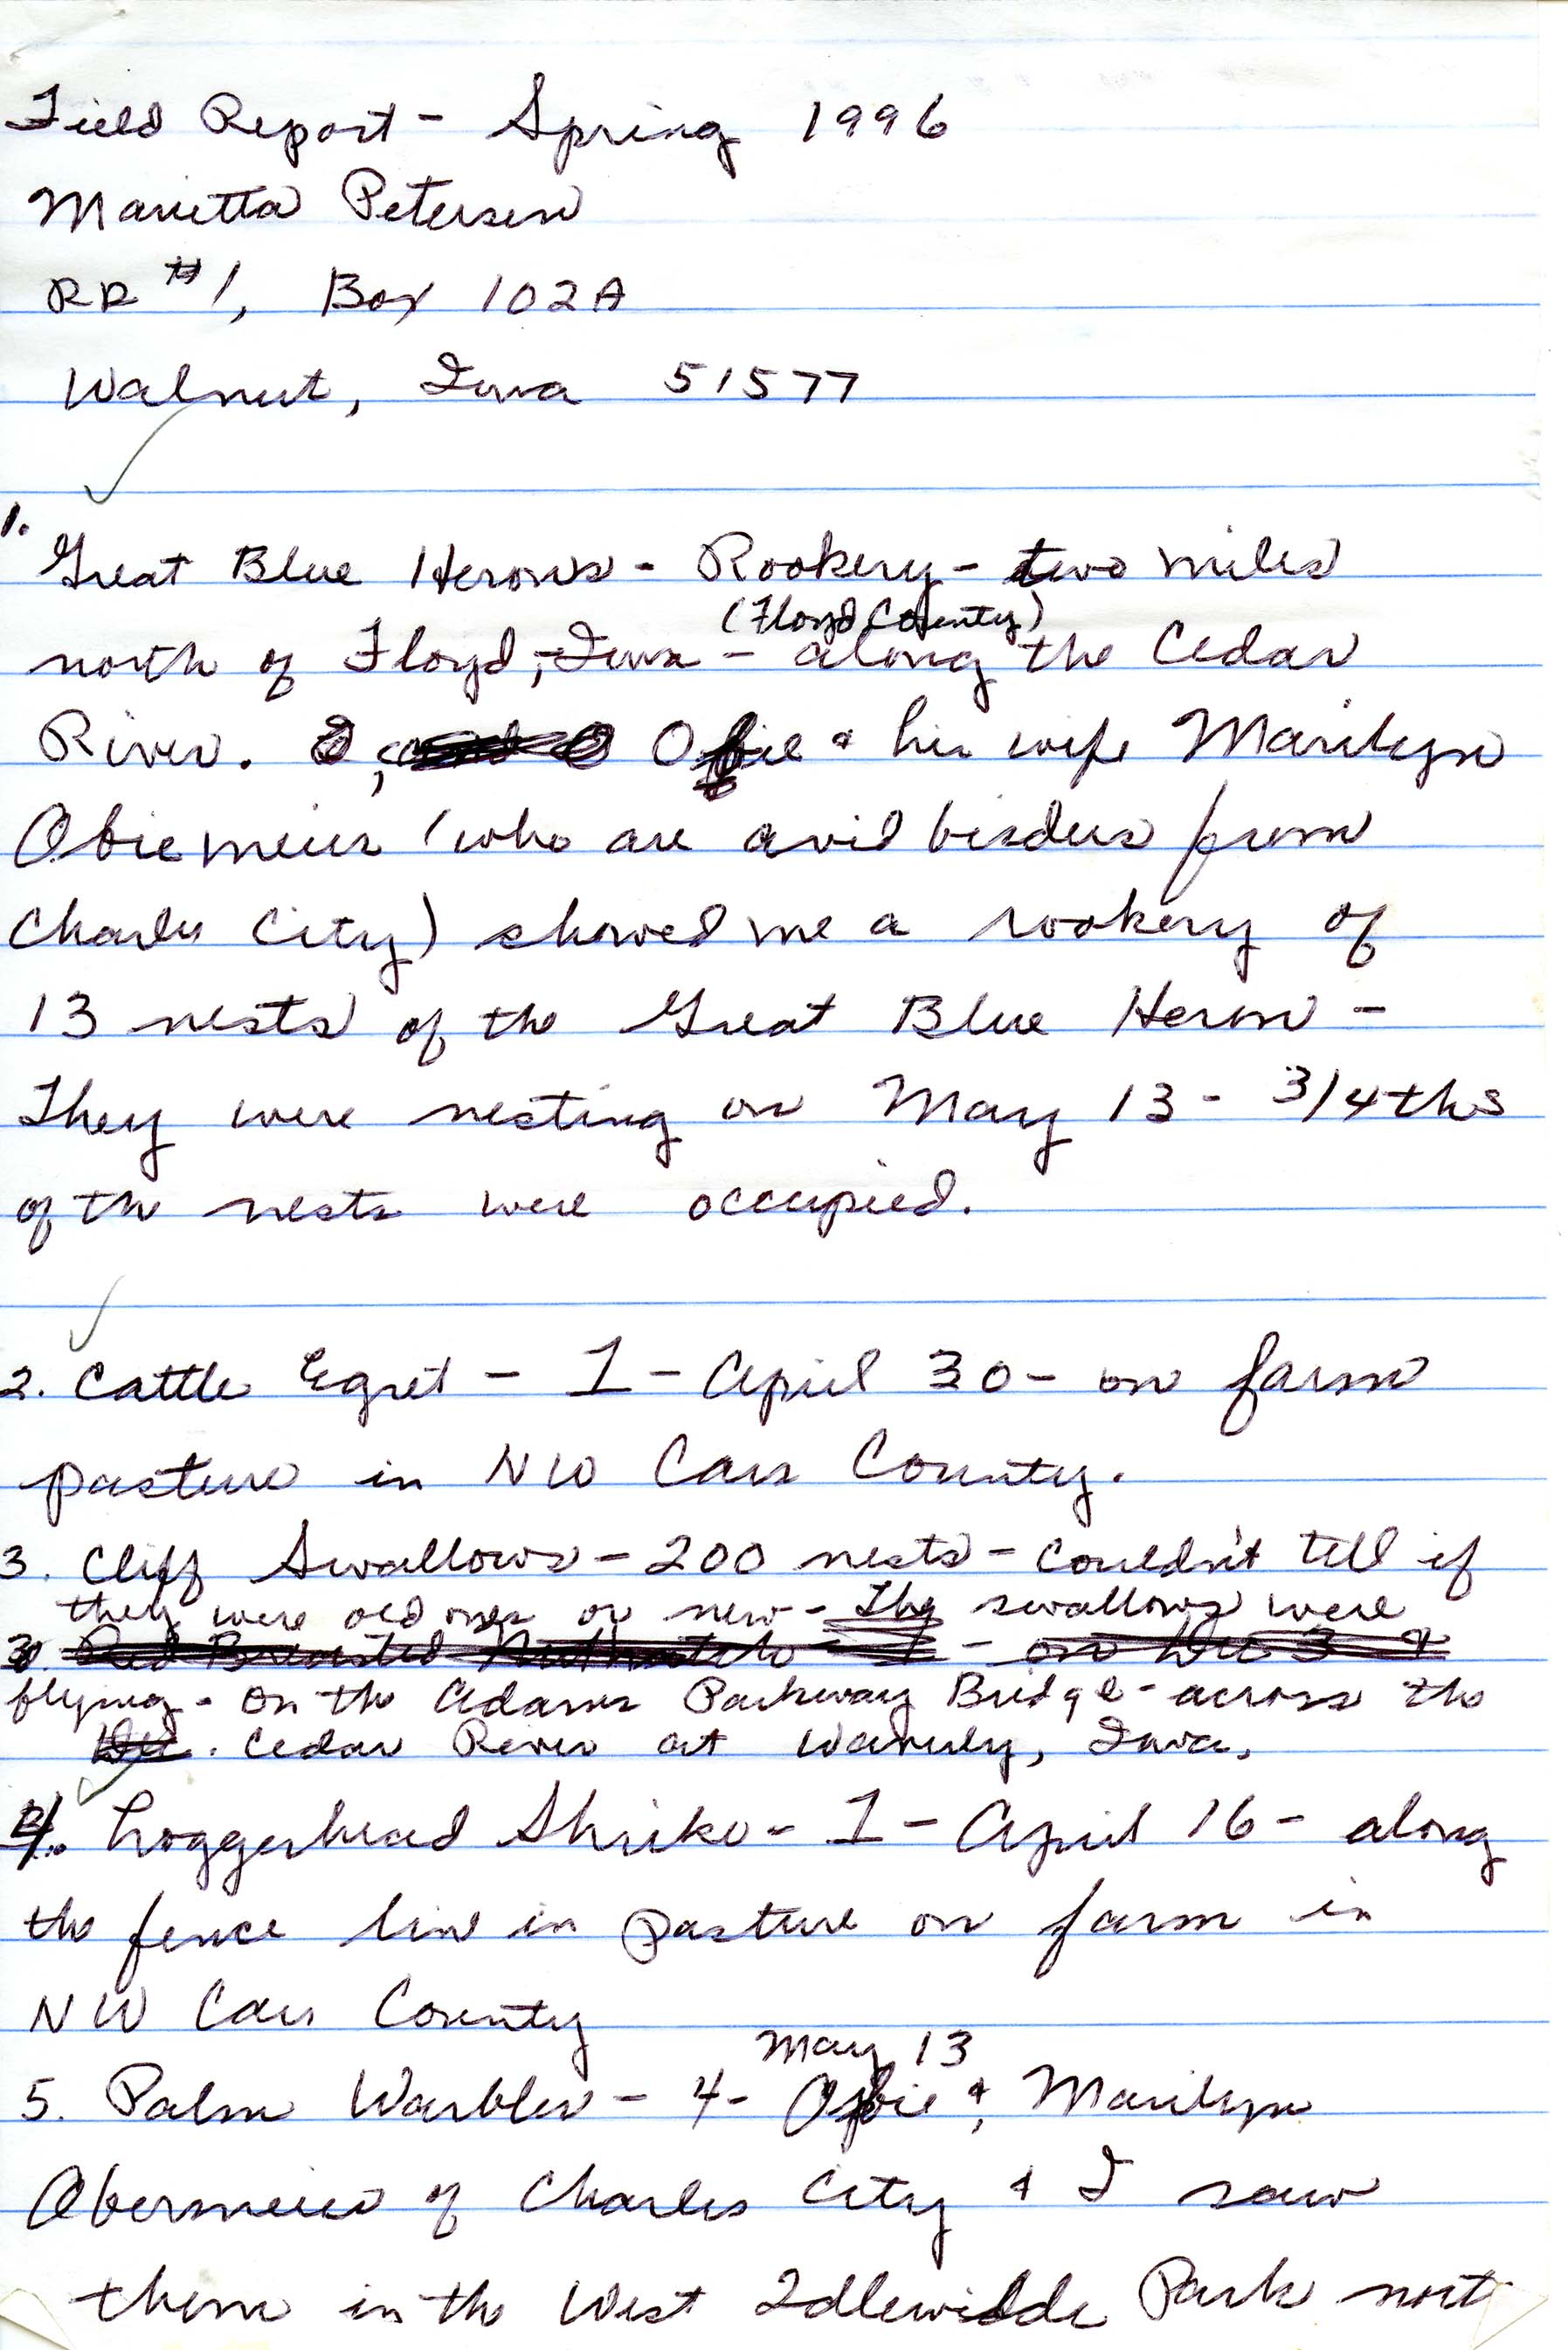 Field notes contributed by Marietta A. Petersen, spring 1996